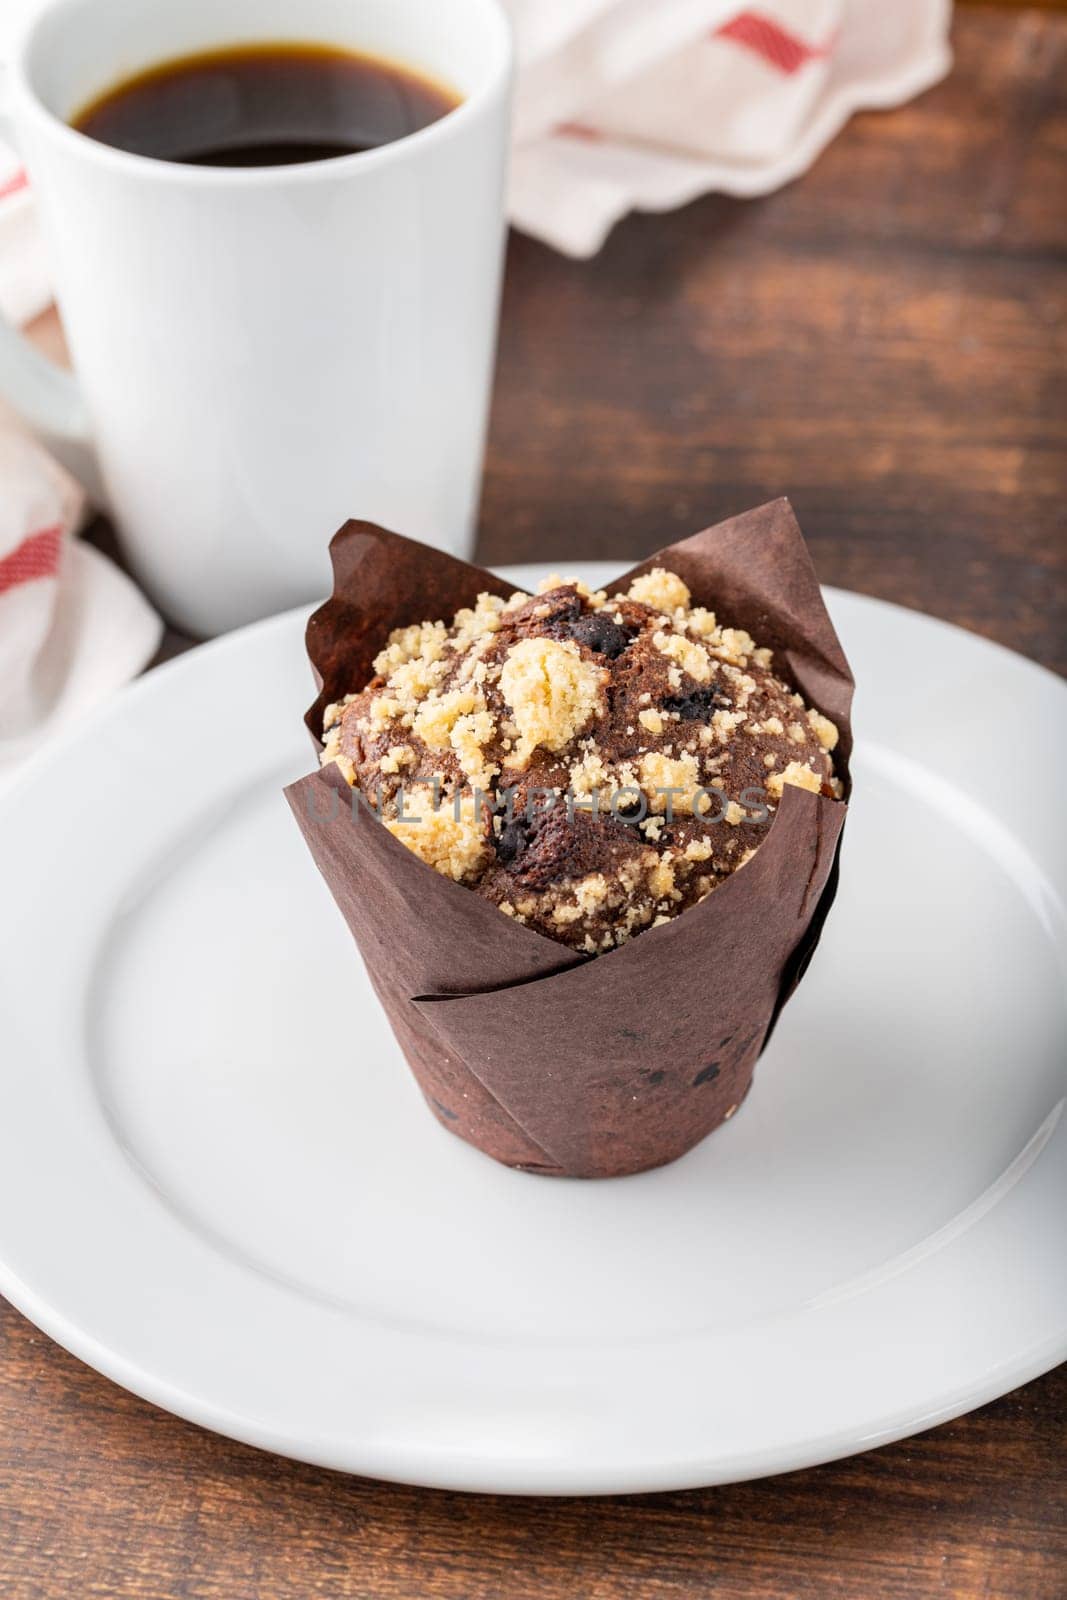 Chocolate muffin or cupcake with coffee on wooden table by Sonat